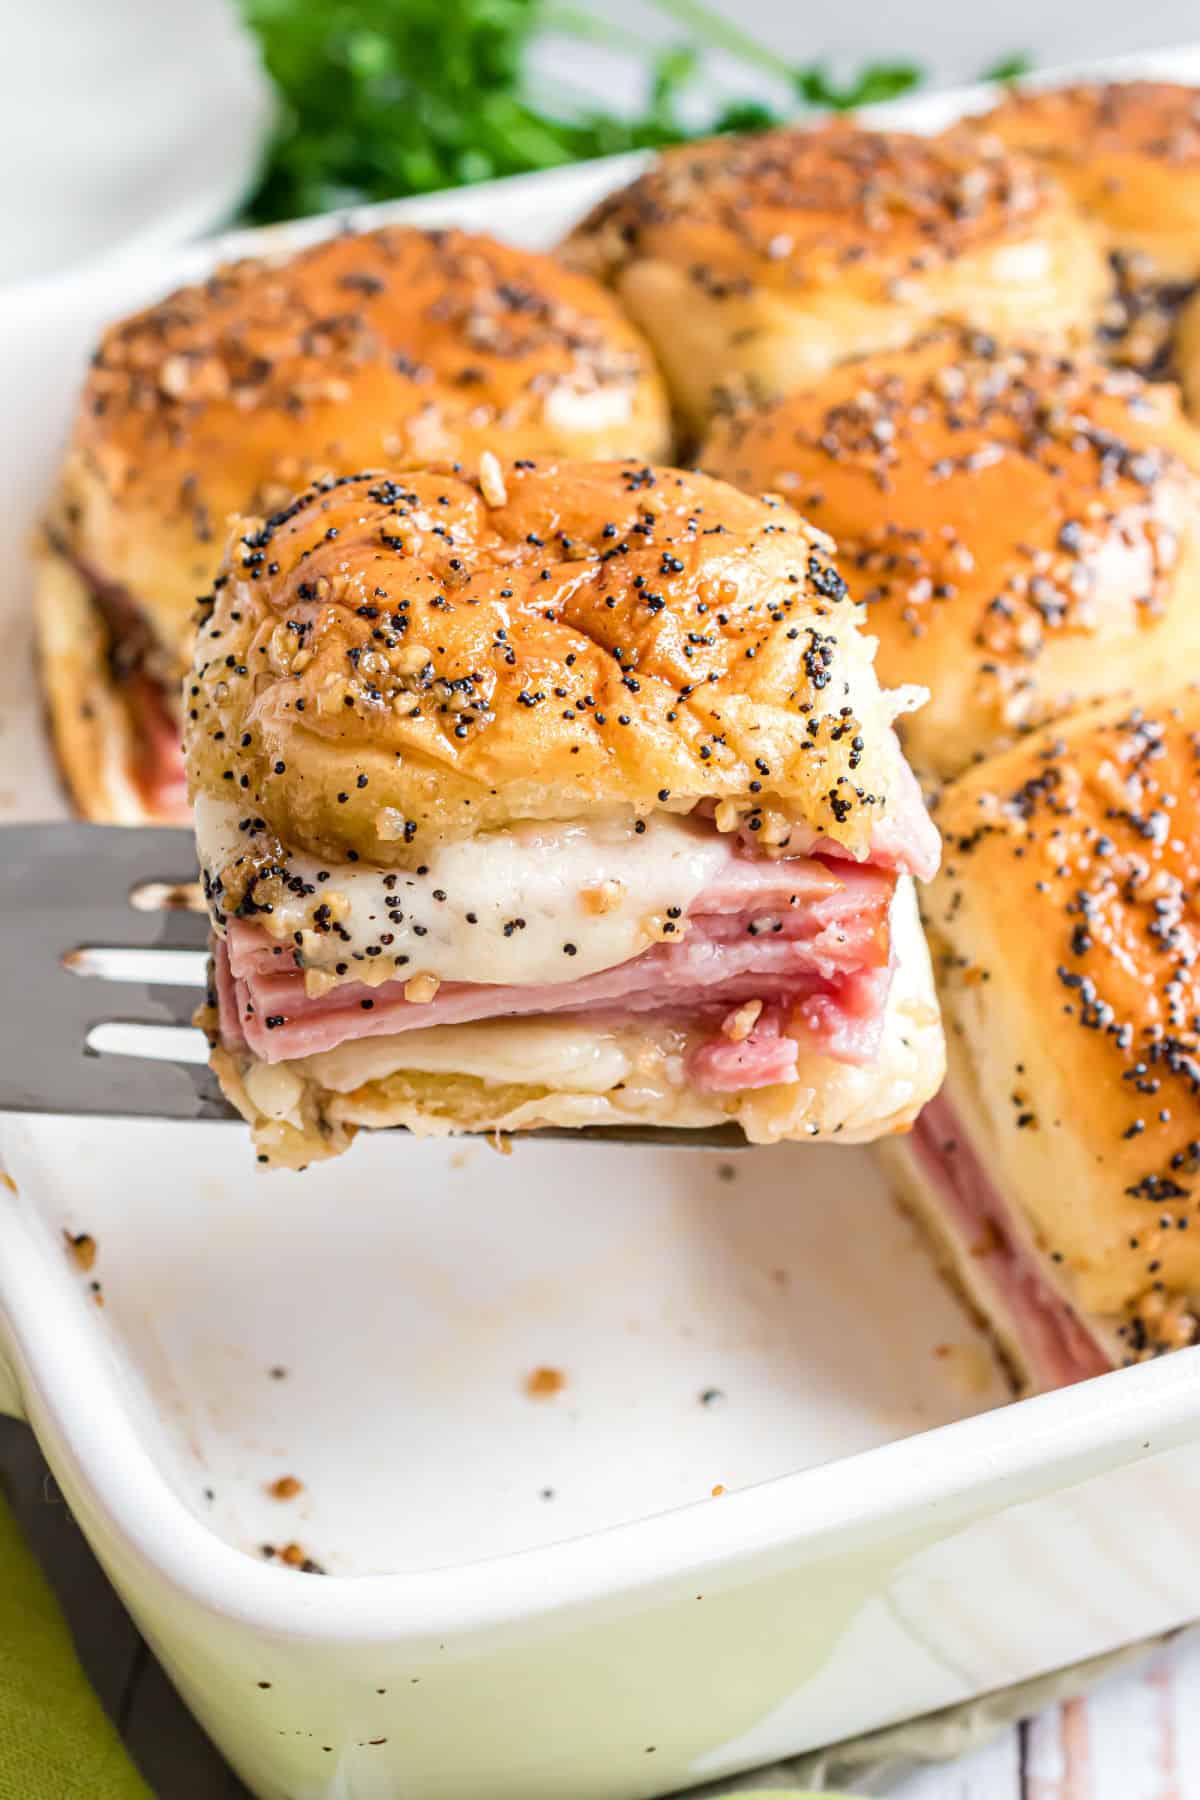 Ham and cheese sliders being lifted out of white baking dish.